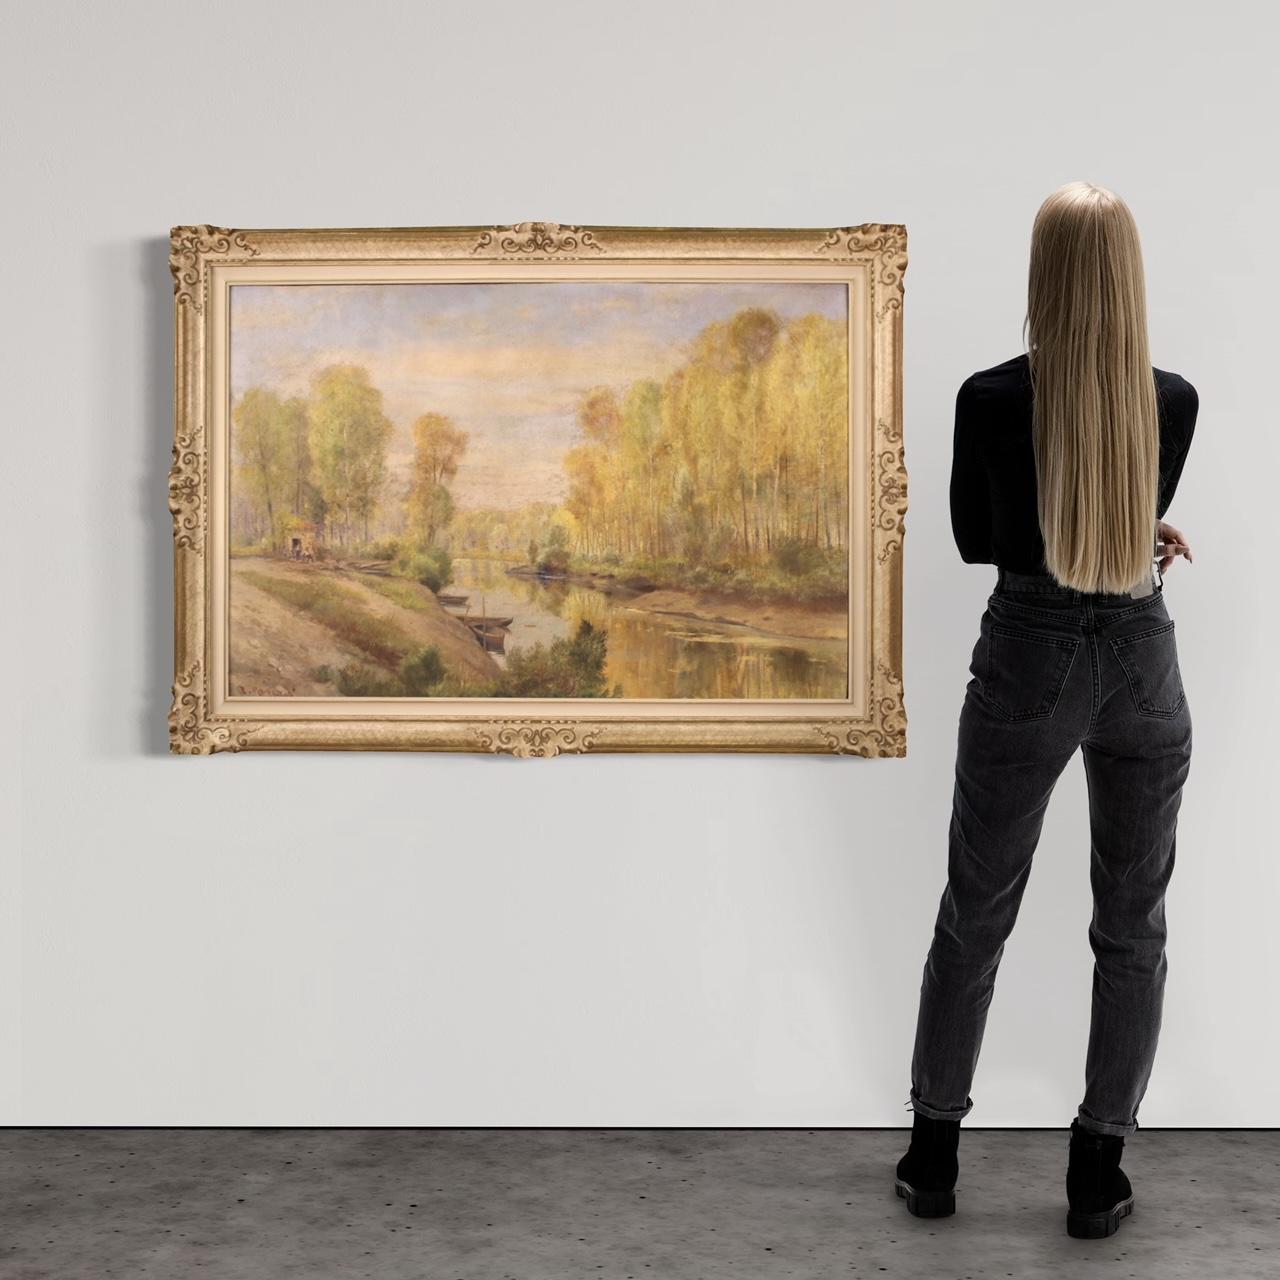 Italian painting from the mid-20th century. Oil painting on masonite depicting a countryside view, river landscape with boats and characters of good pictorial quality. Painting adorned with a beautifully decorated lacquered and gilded (bronze